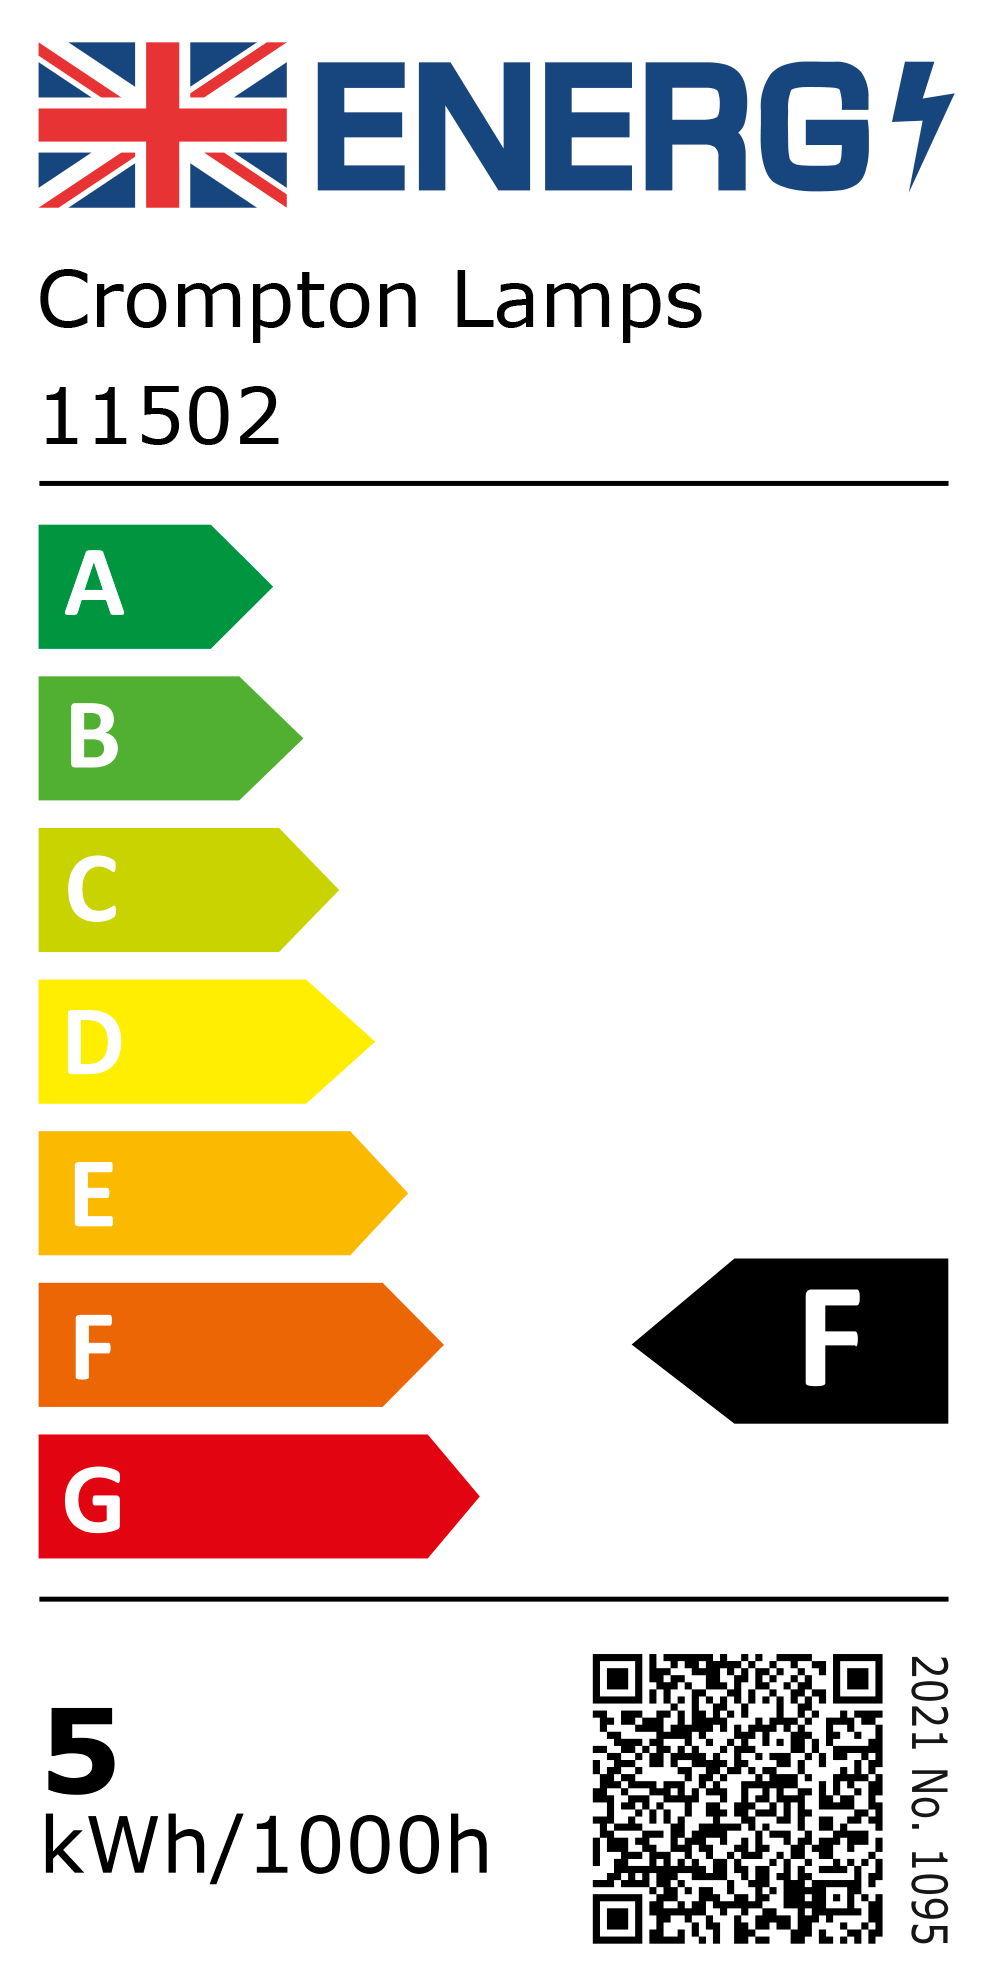 New 2021 Energy Rating Label: Stock Code 11502